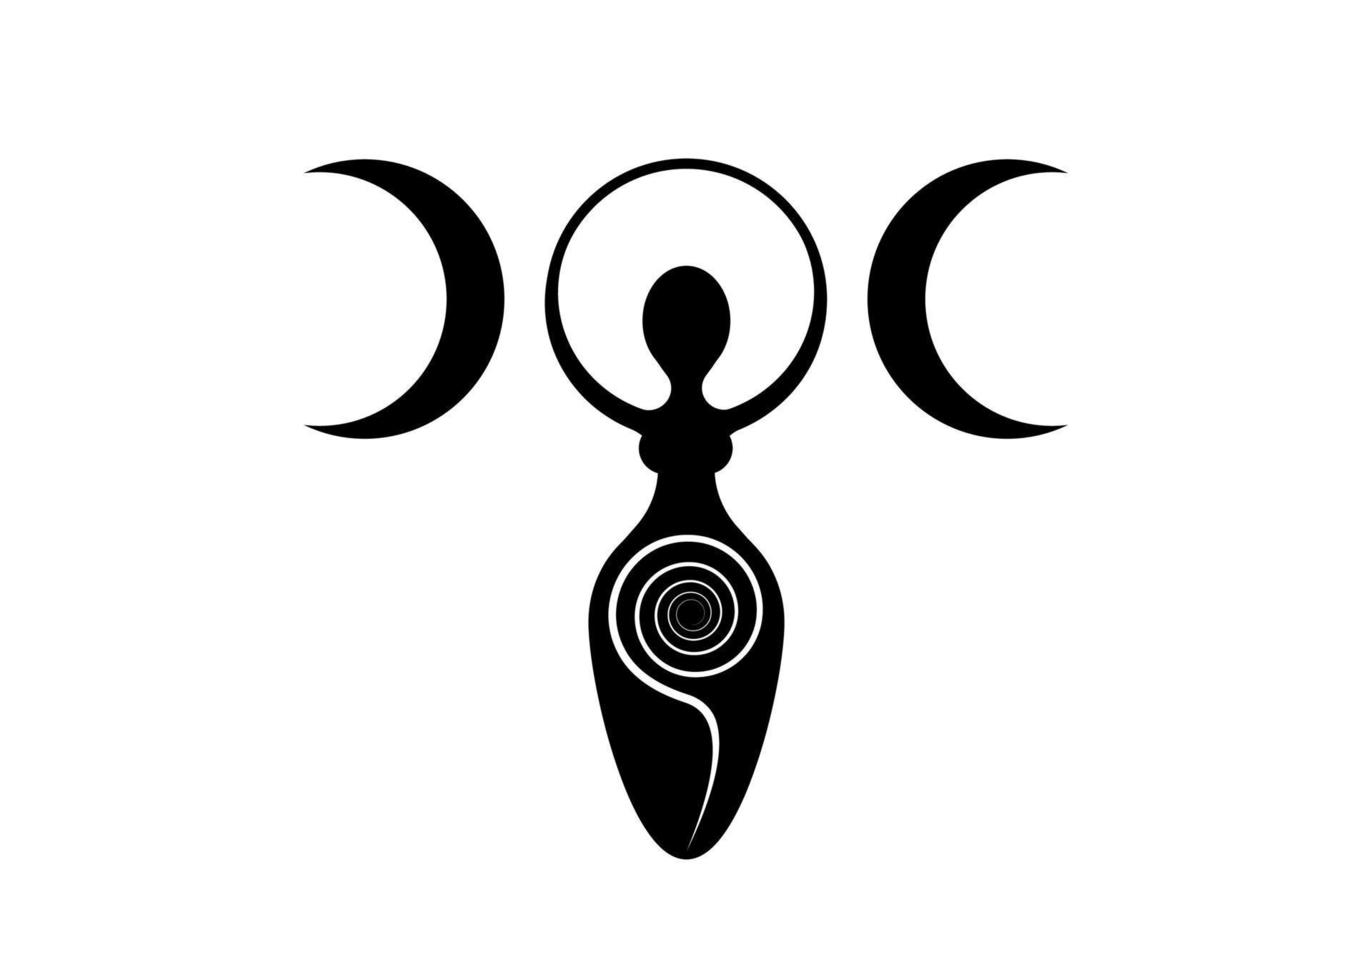 Wiccan Woman Logo triple moon goddess, spiral of fertility, Pagan Symbols, cycle of life, death and rebirth. Wicca mother earth symbol of sexual procreation, vector tattoo sign icon isolated on white